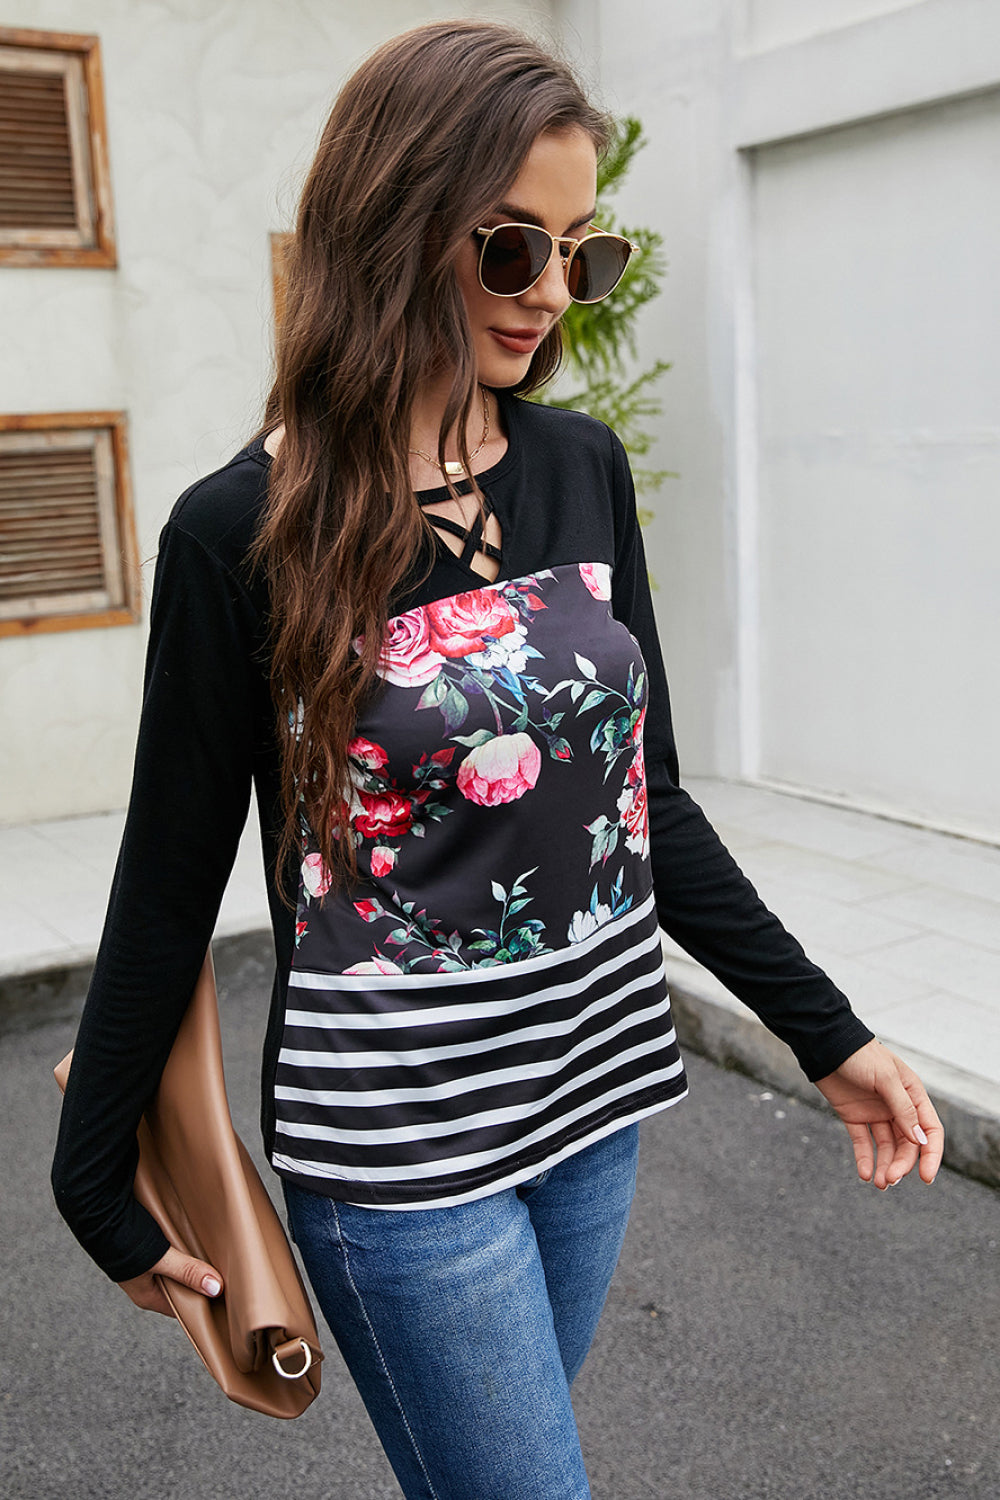 Floral and Striped Print Lace Up Top